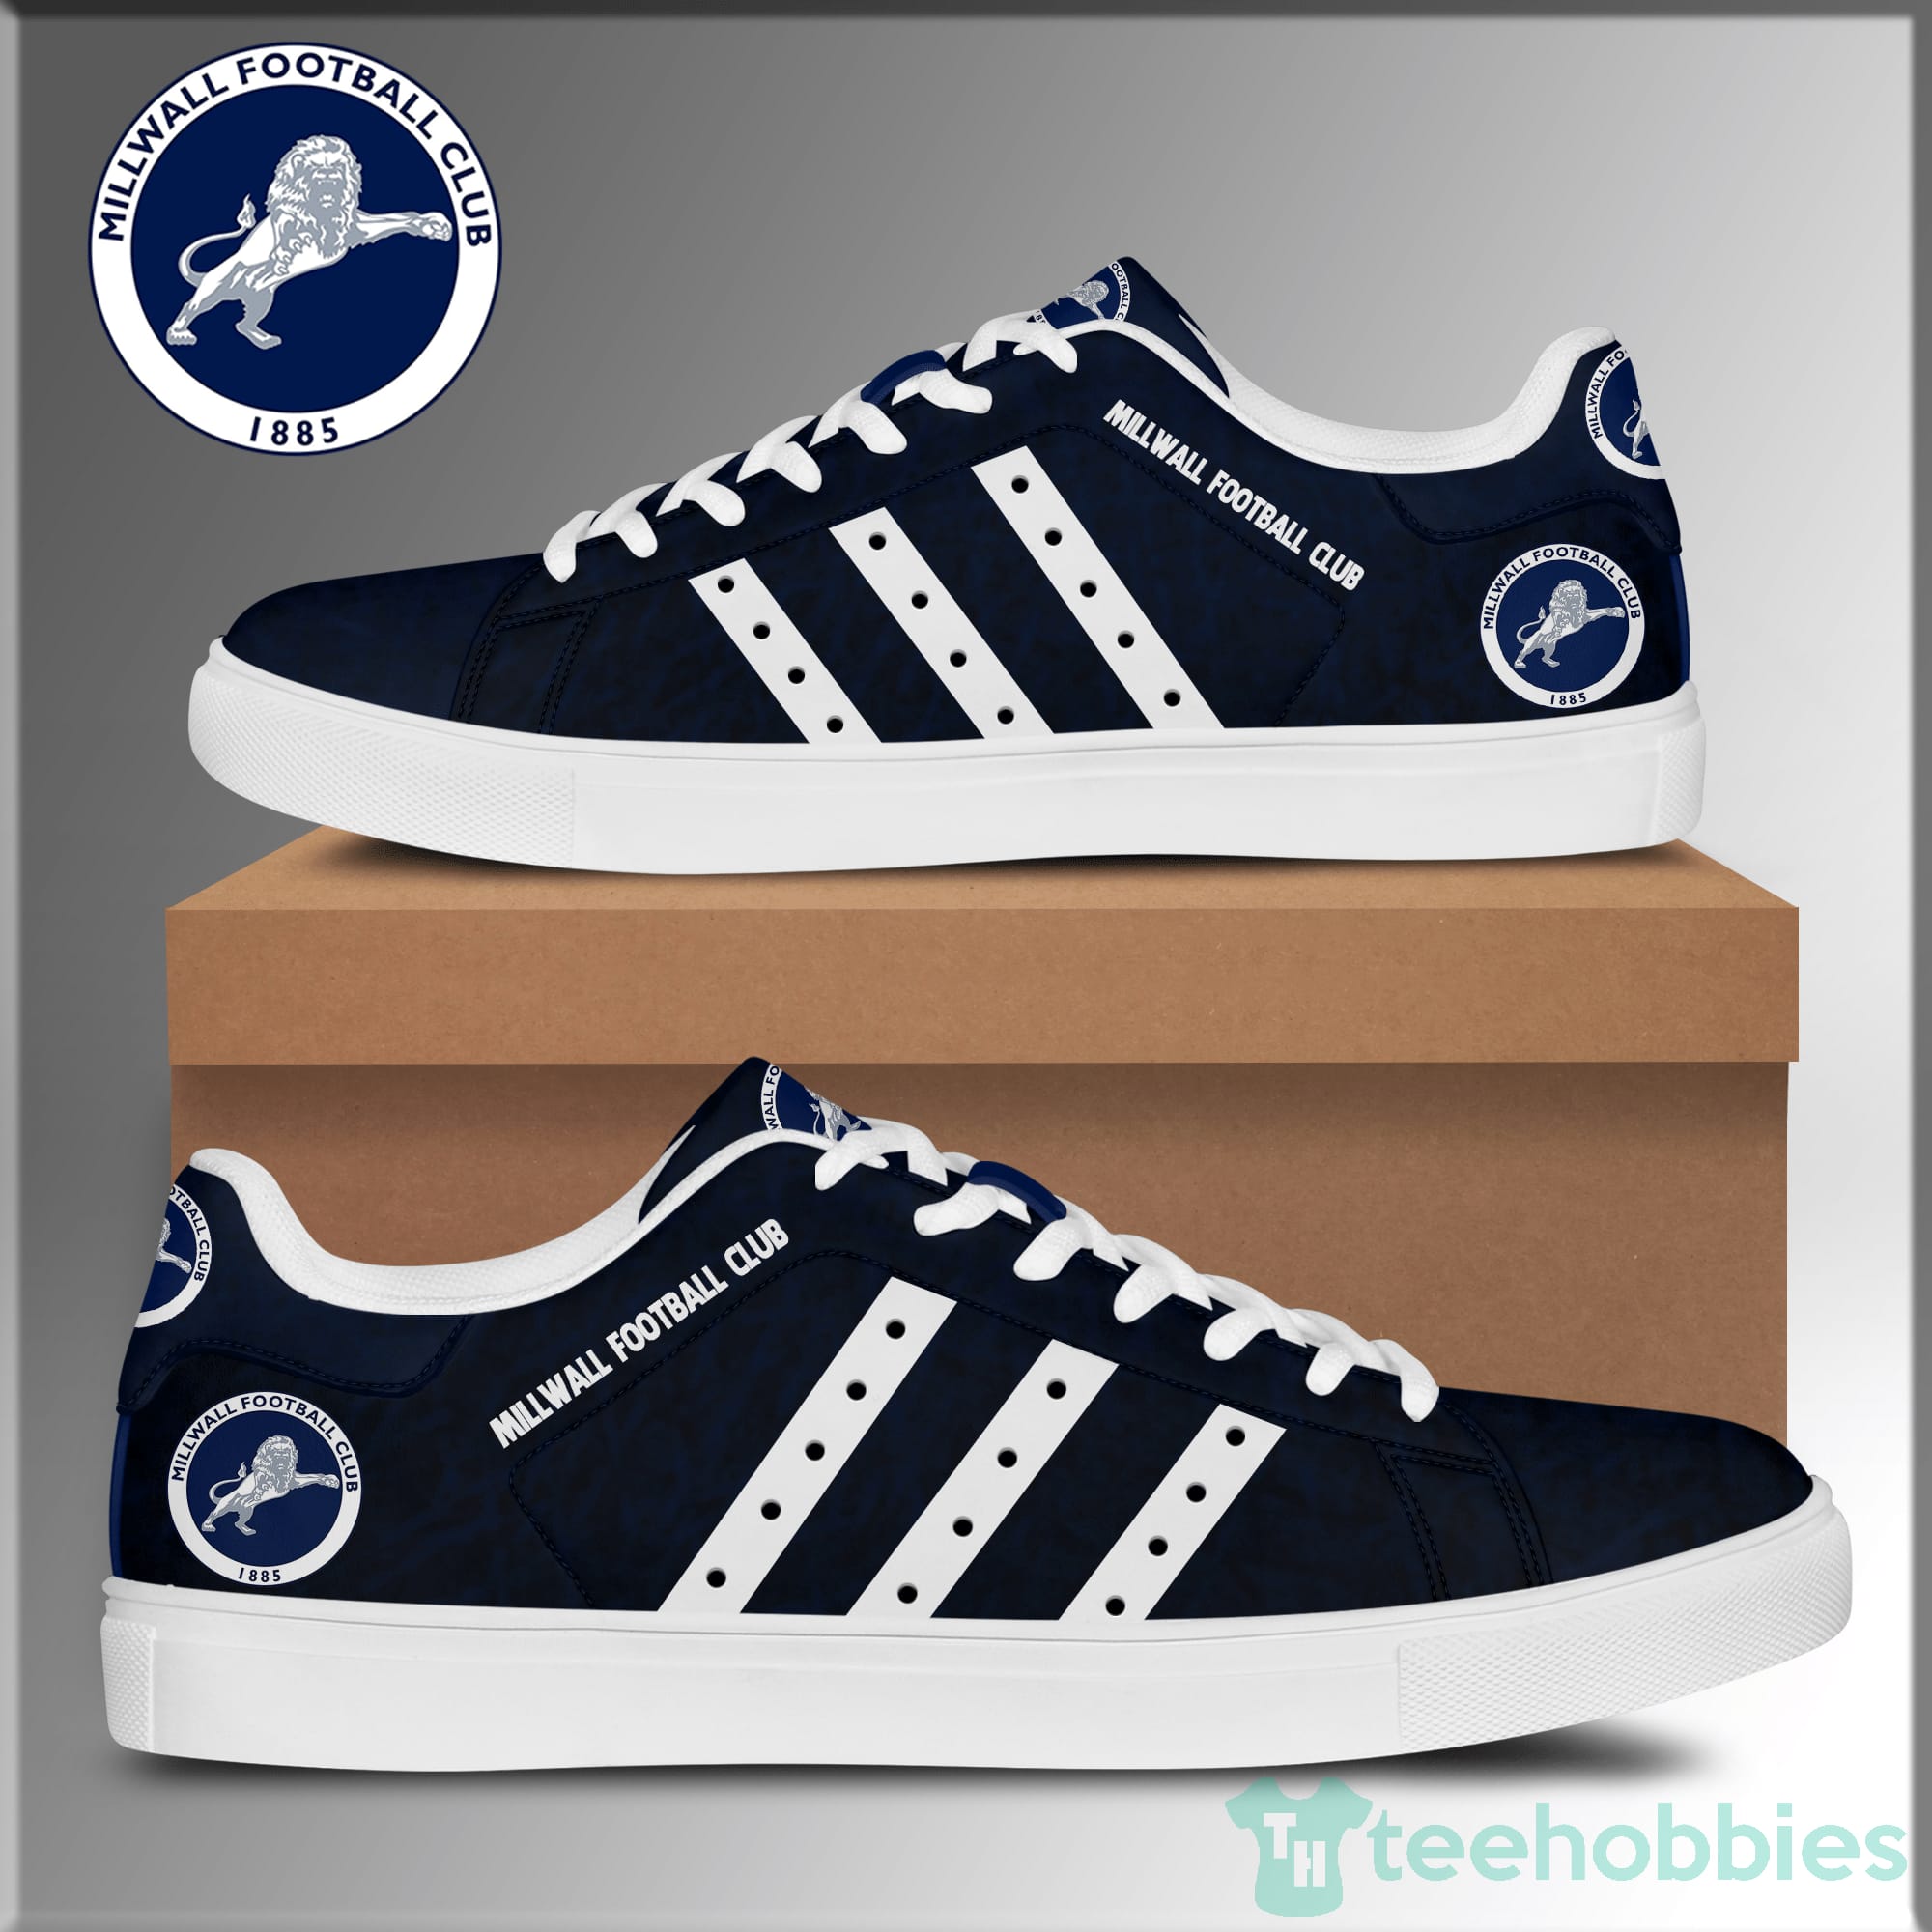 Millwall Football Club White Striped Low Top Skate Shoes Product photo 1